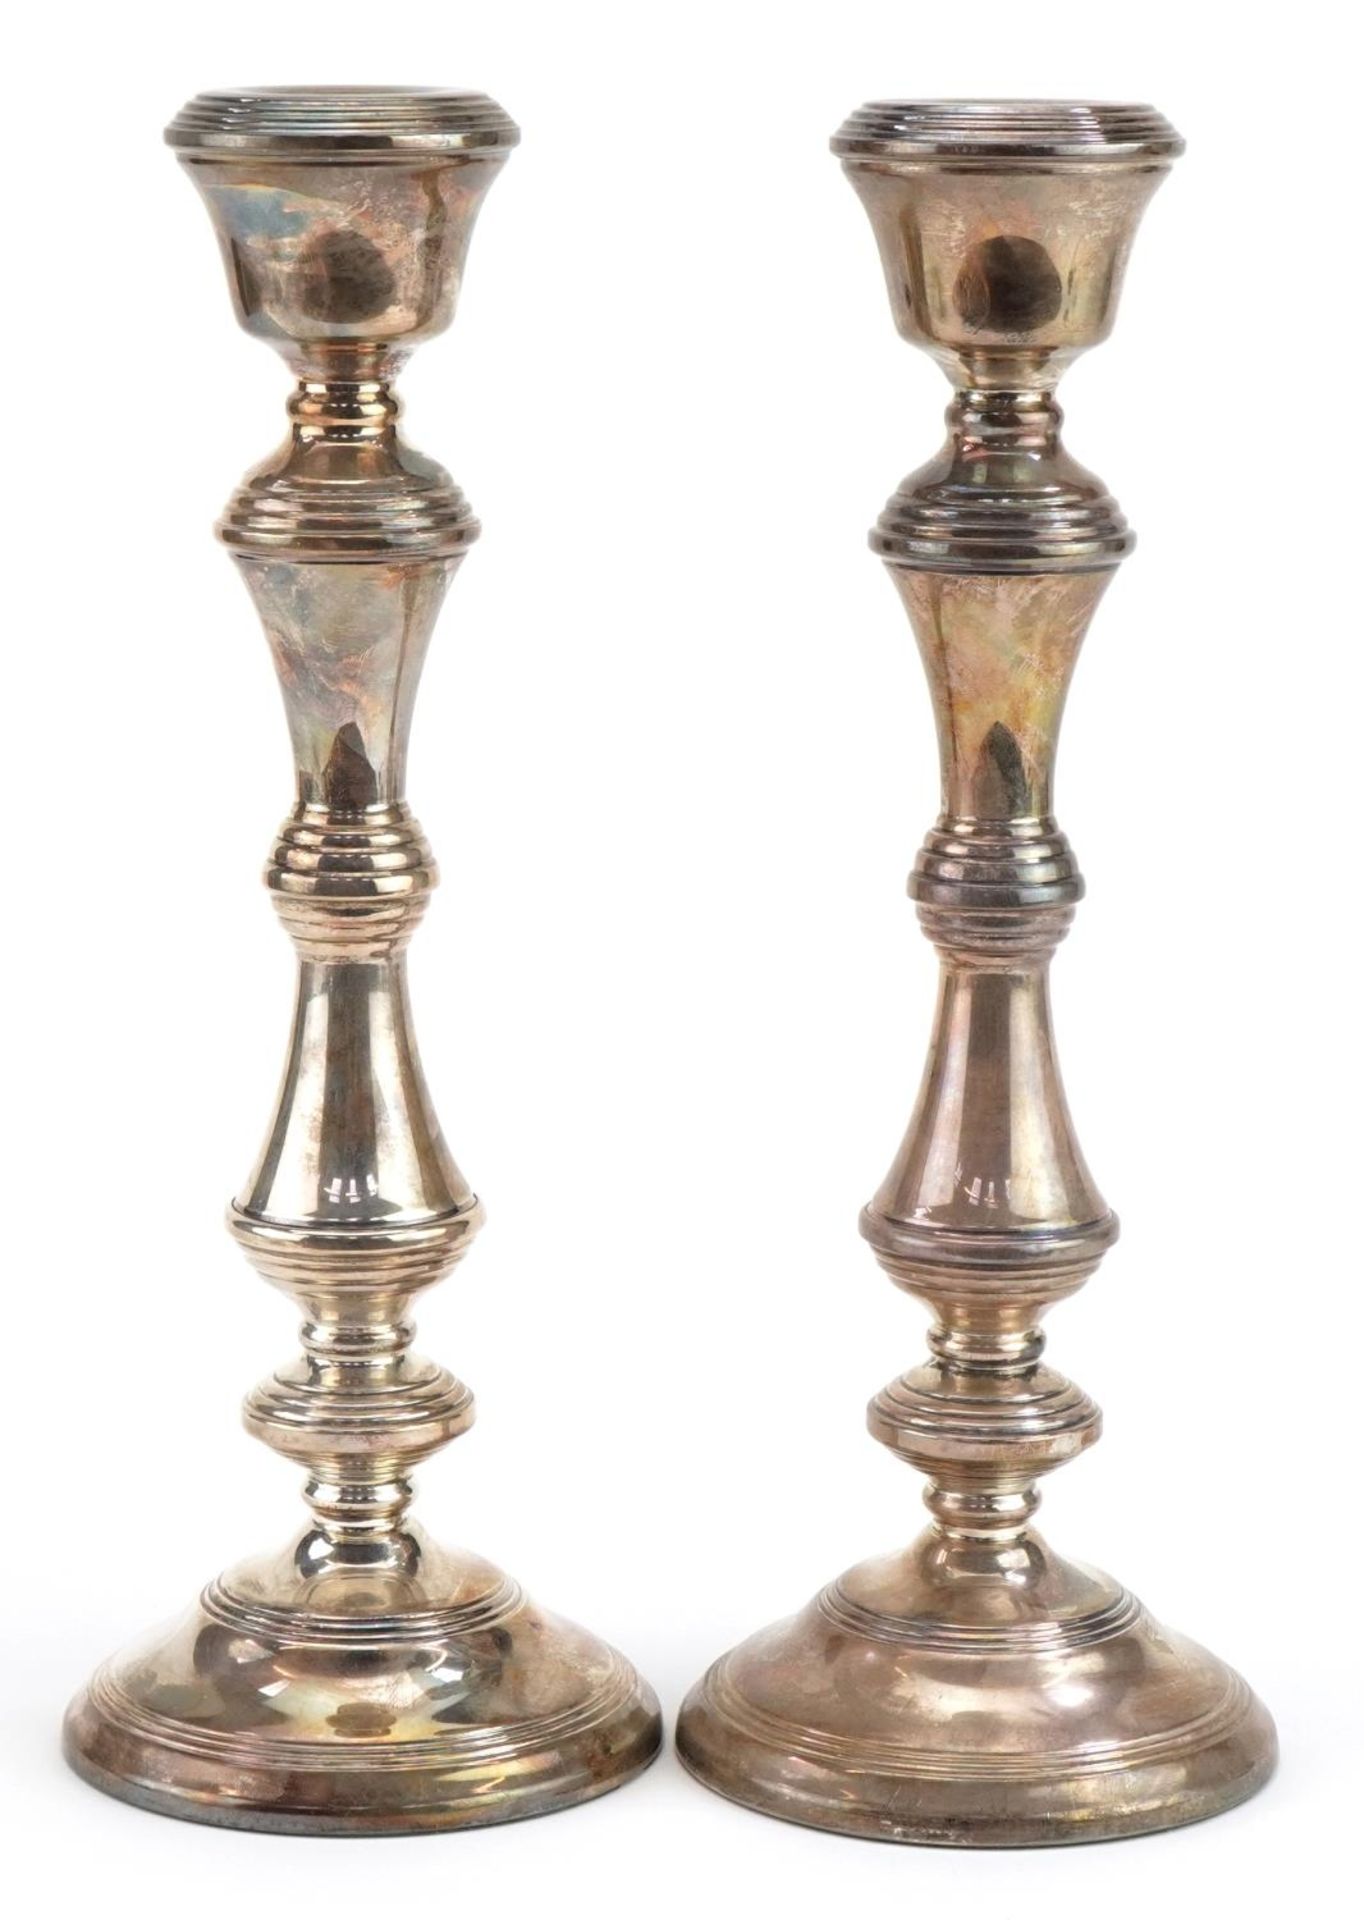 W I Broadway & Co, large pair of Elizabeth II silver filled candlesticks, one with British Petroleum